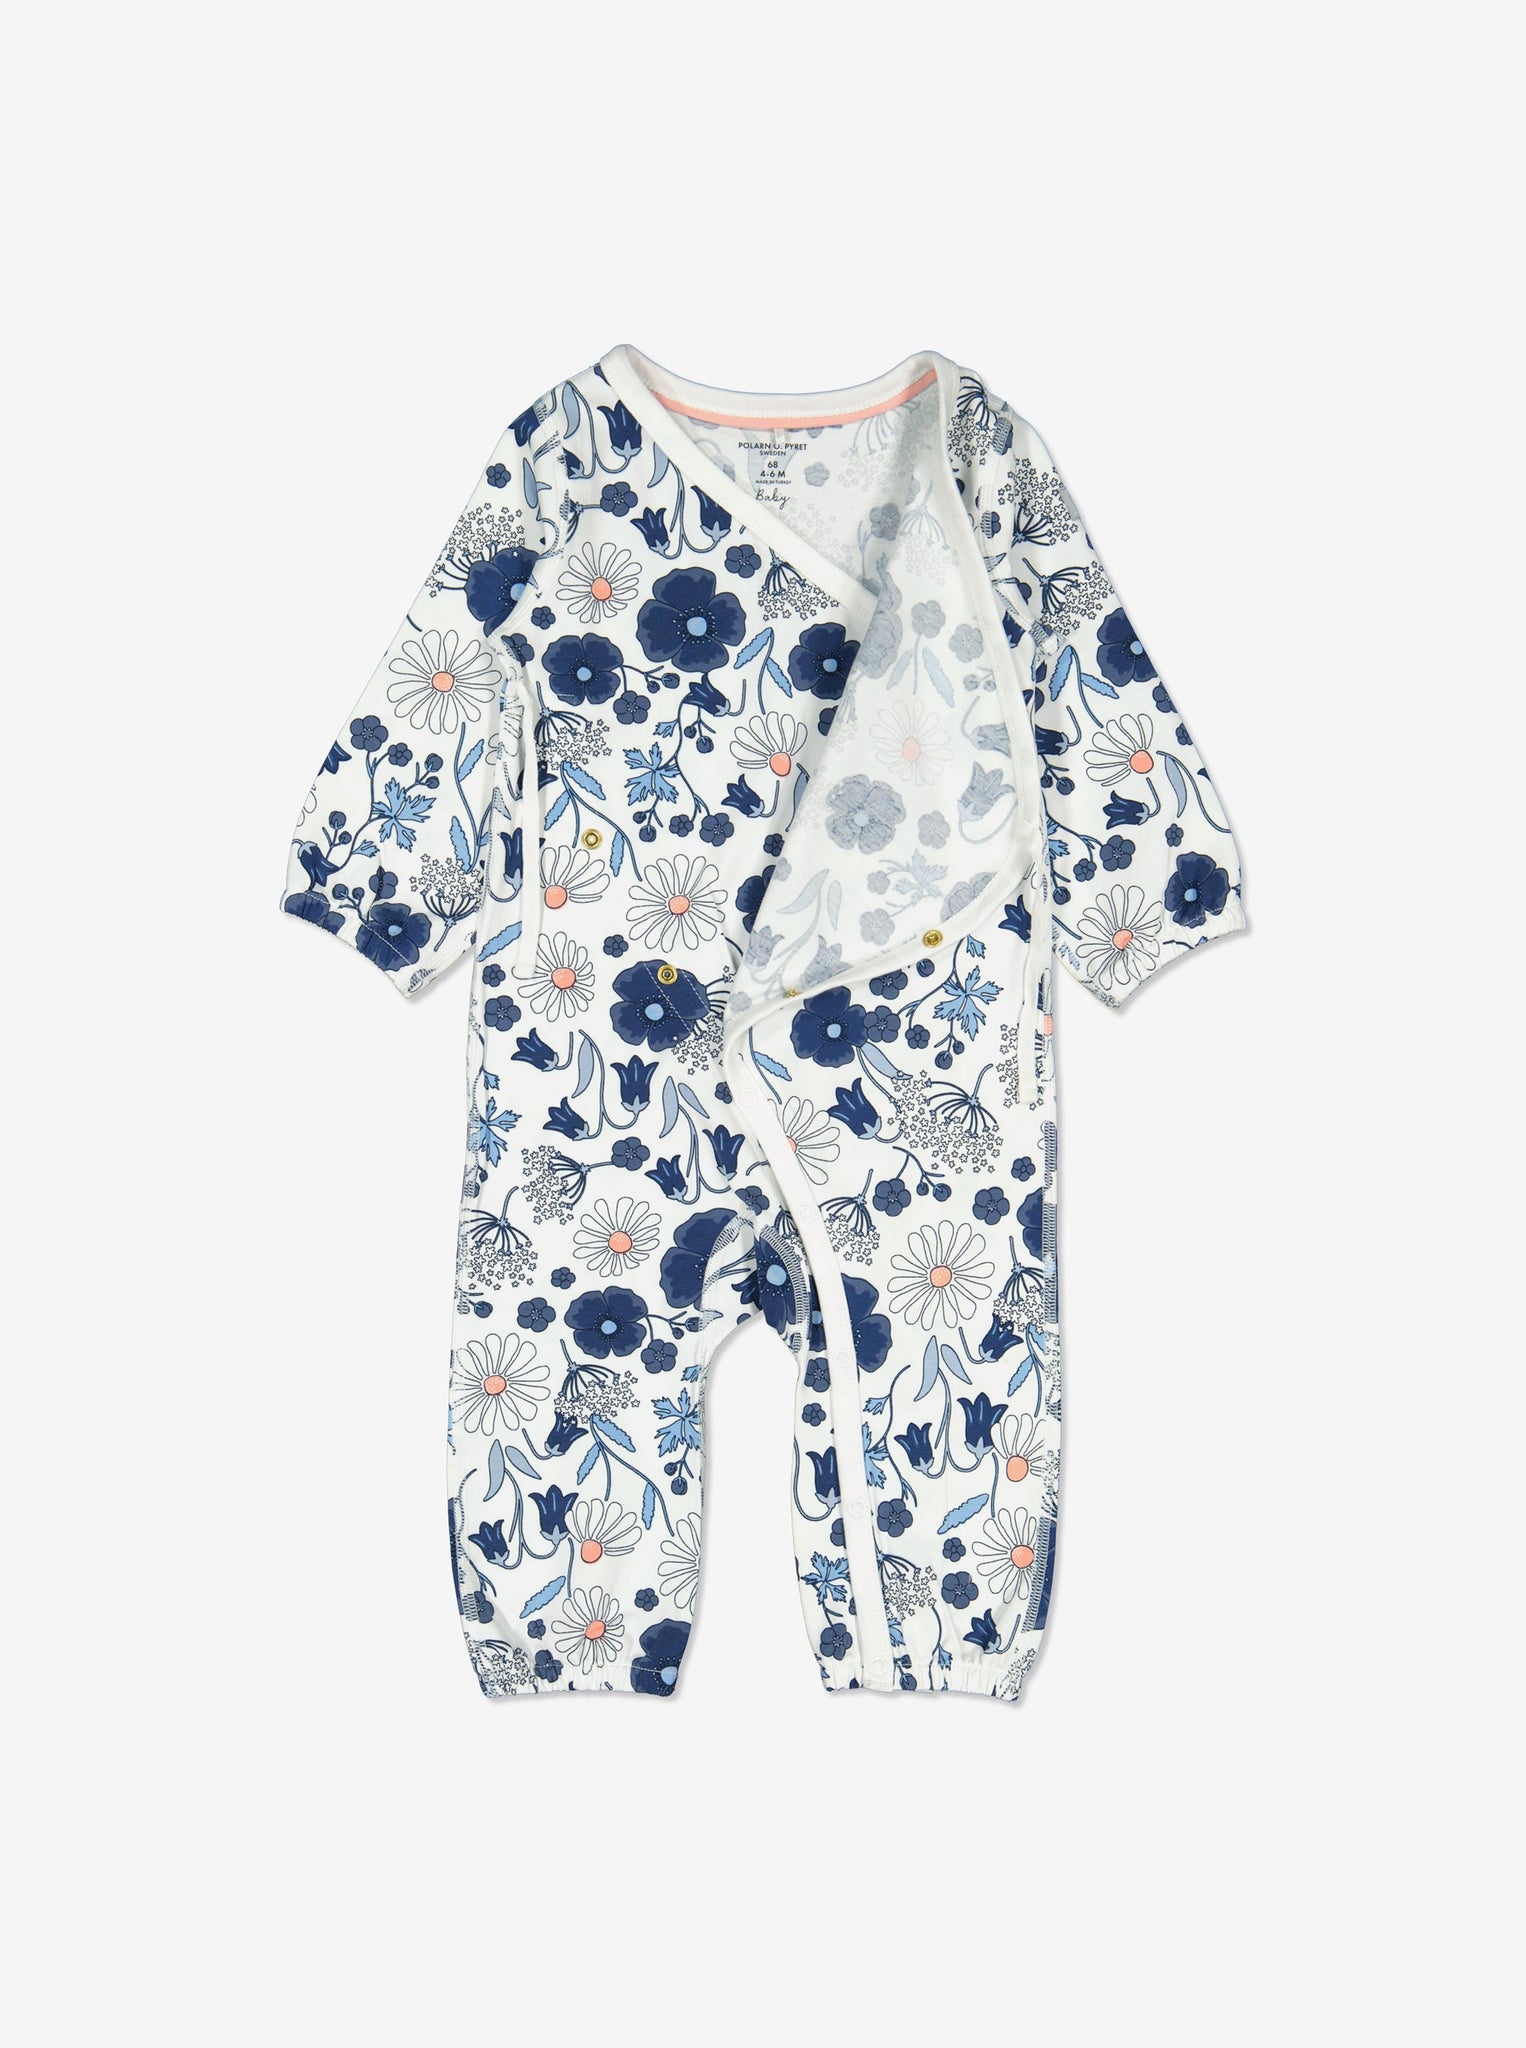 Floral Print Newborn Baby Romper from Polarn O. Pyret Kidswear. Ethically made and sustainably sourced materials.